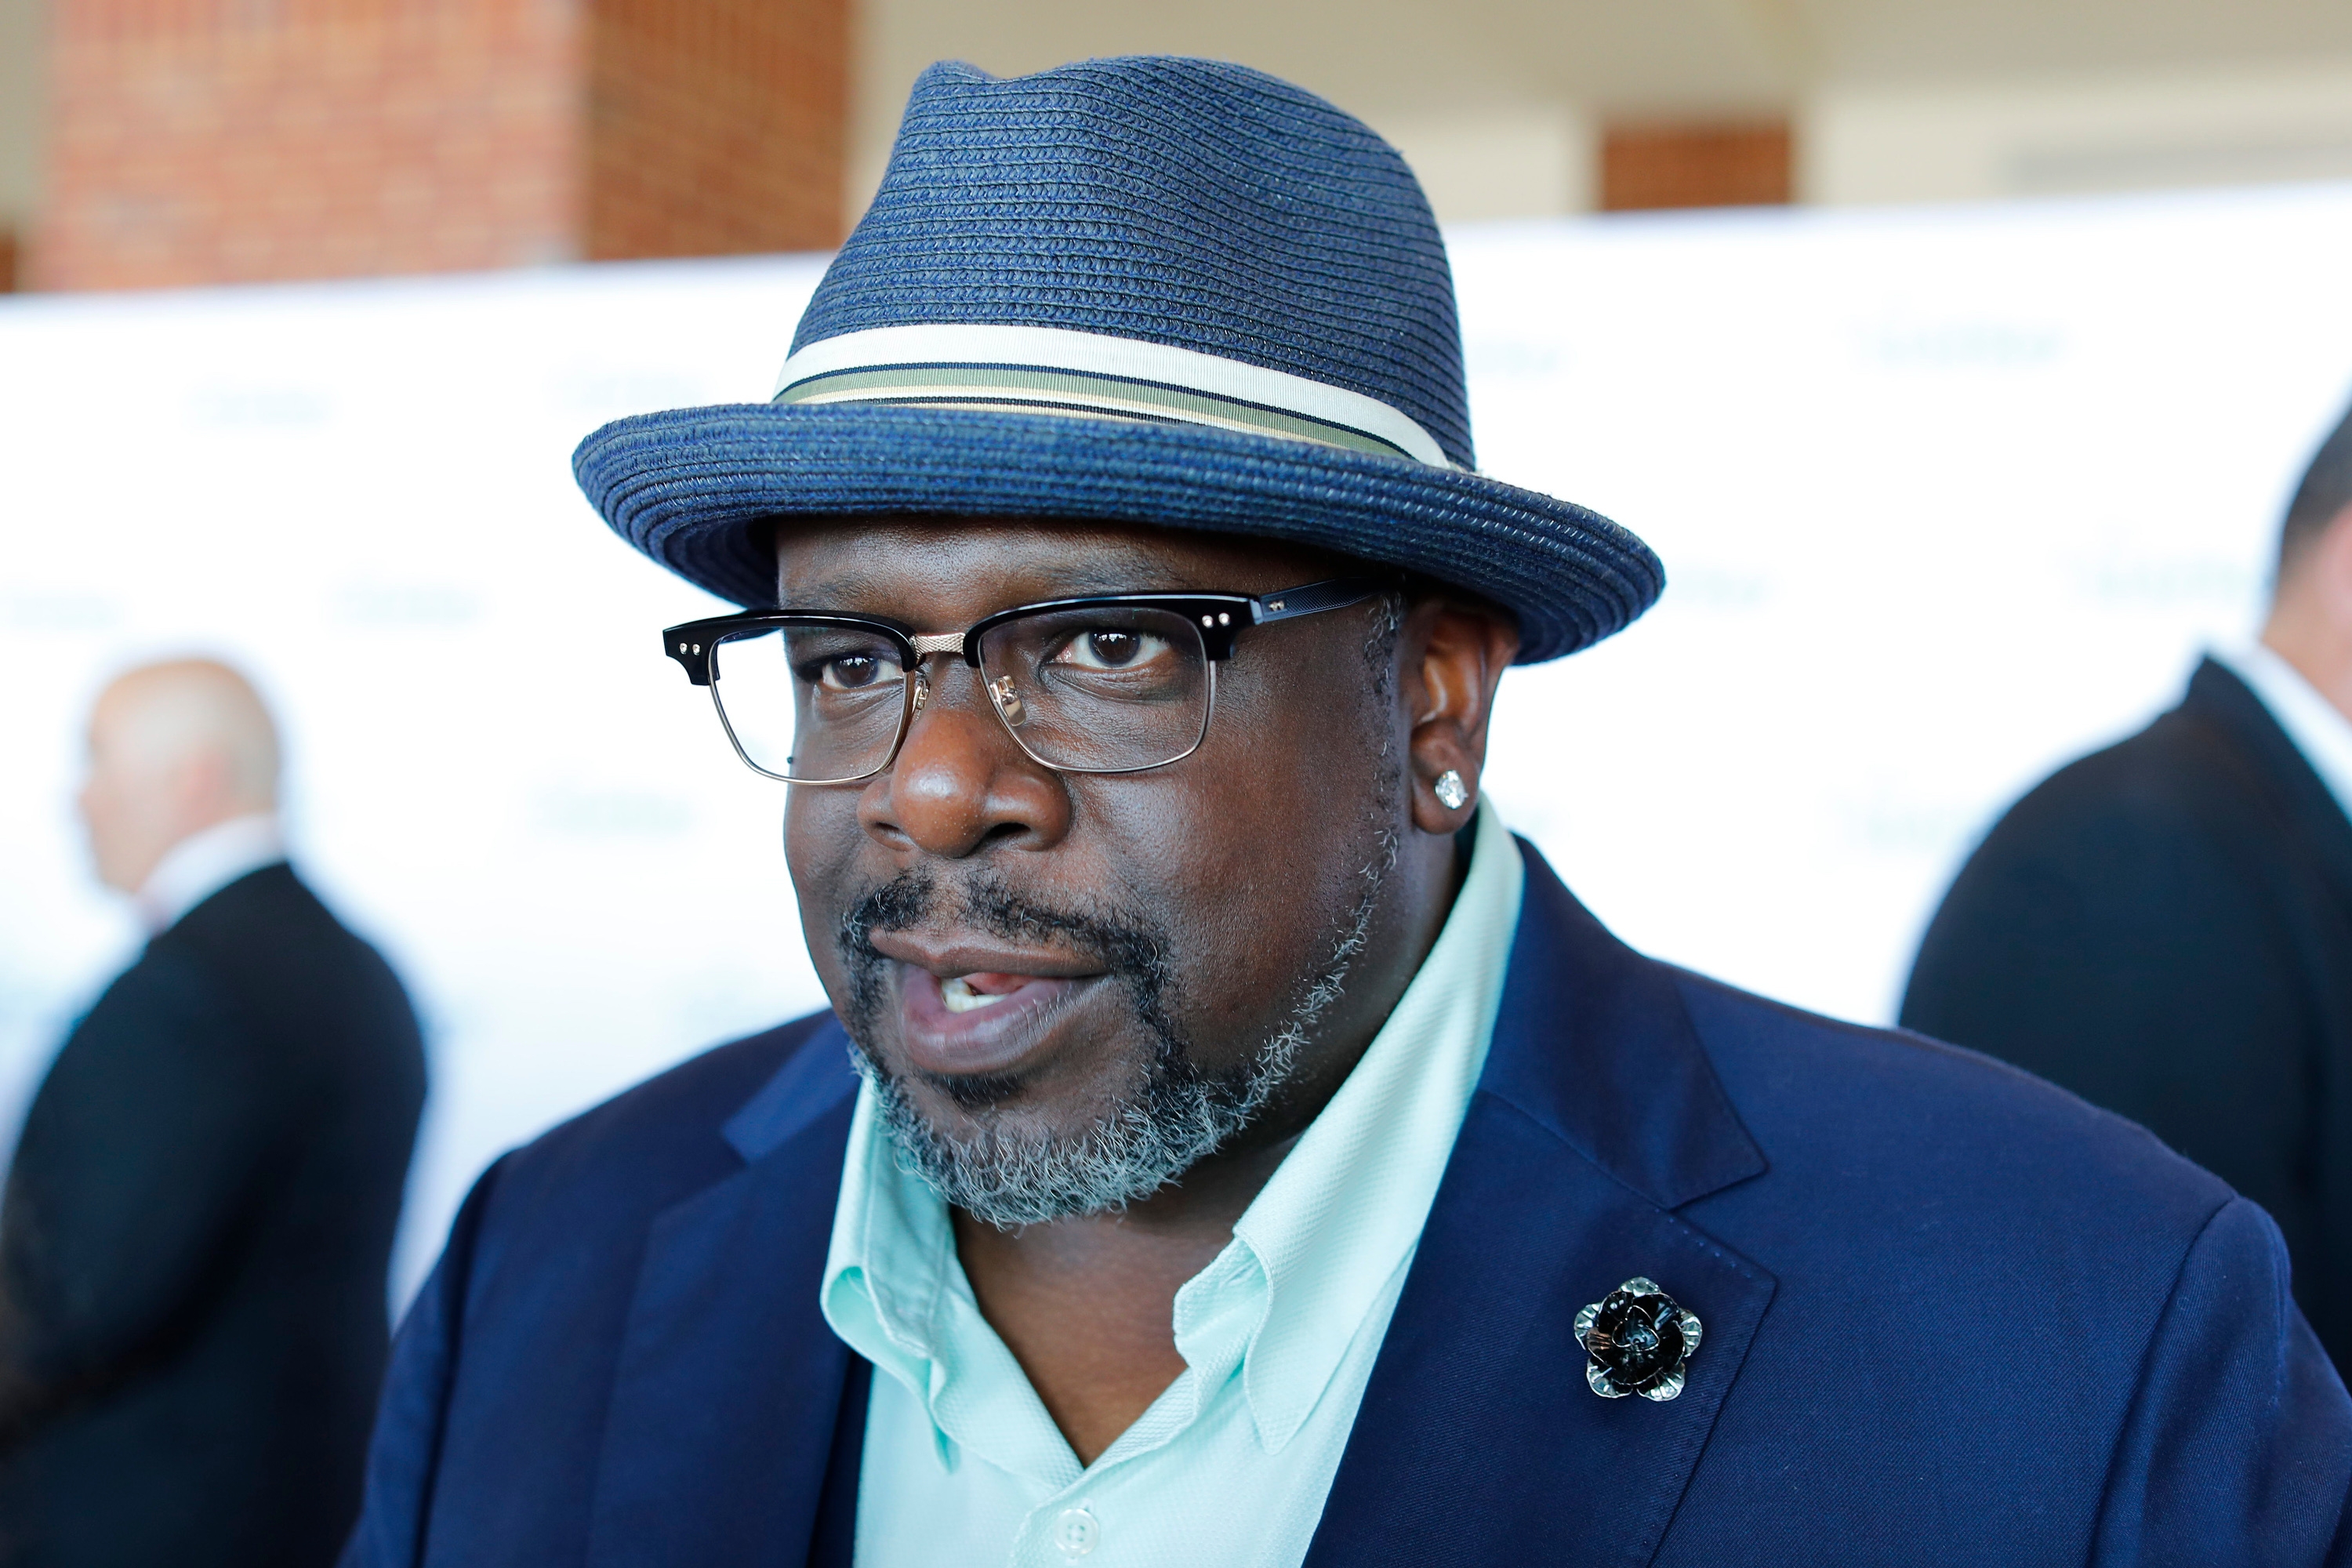 EXCLUSIVE! Cedric The Entertainer Talks Nipsey Hussle, Gentrification, Upcoming Modesto Show